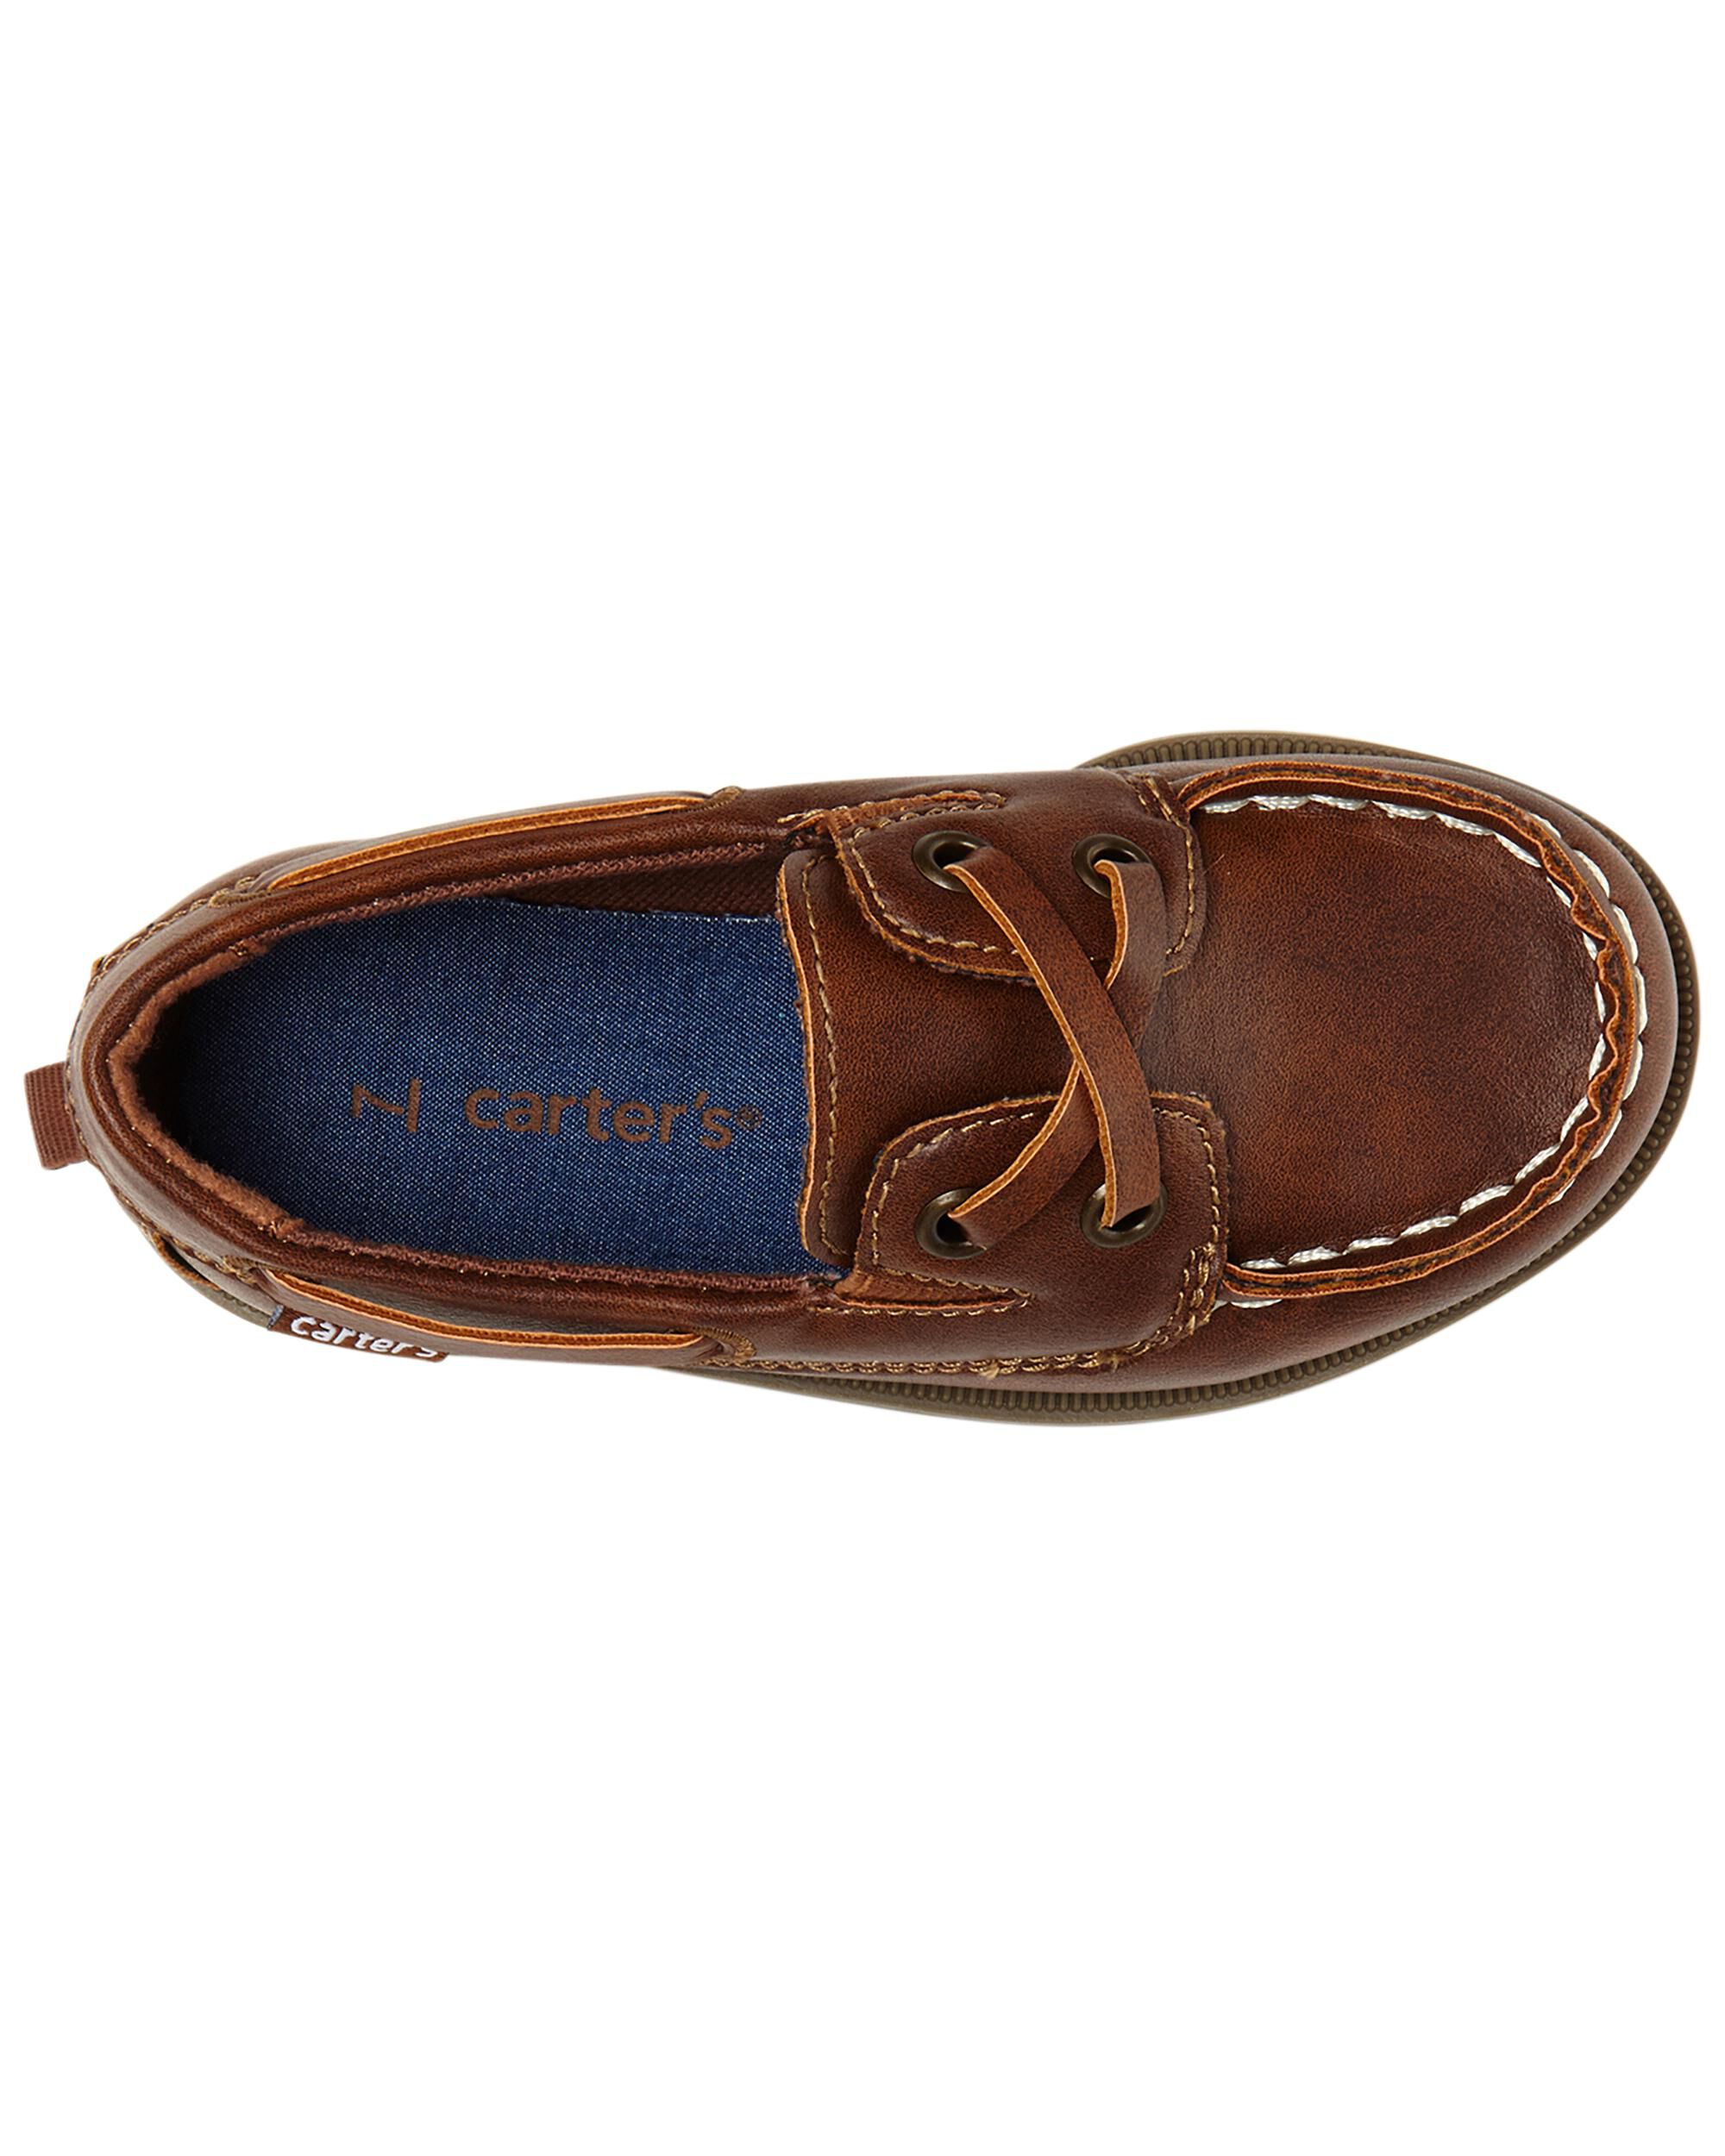 Carter's Toddler Boy's Bauk Loafers Boat Shoes 